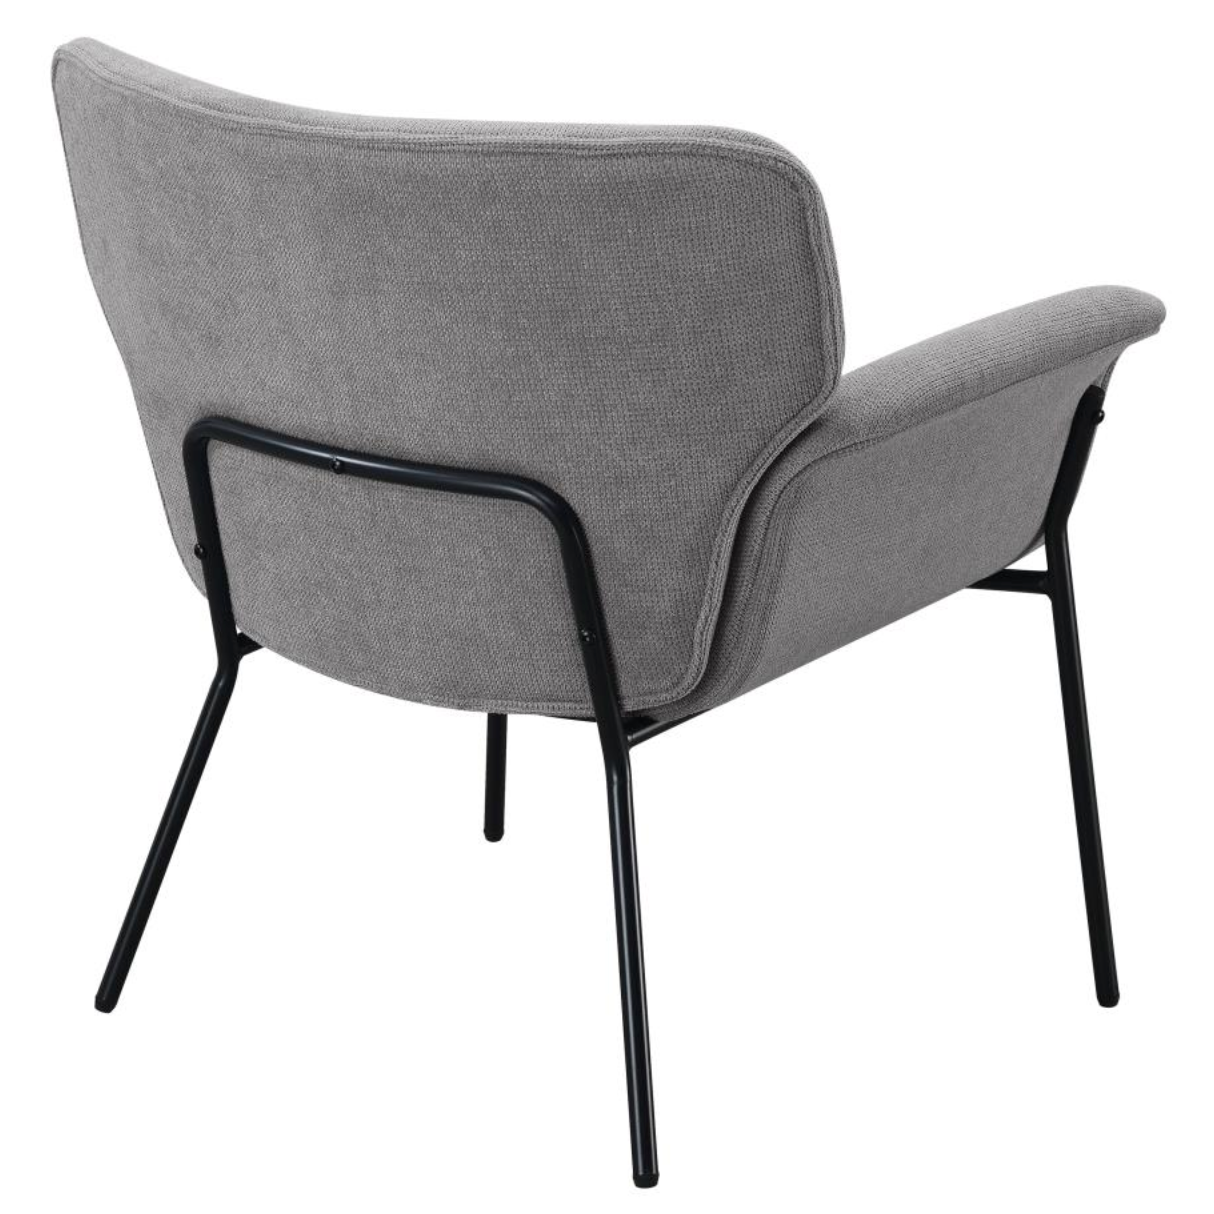 DAVINA Upholstered Flared Arms Accent Chair Grey